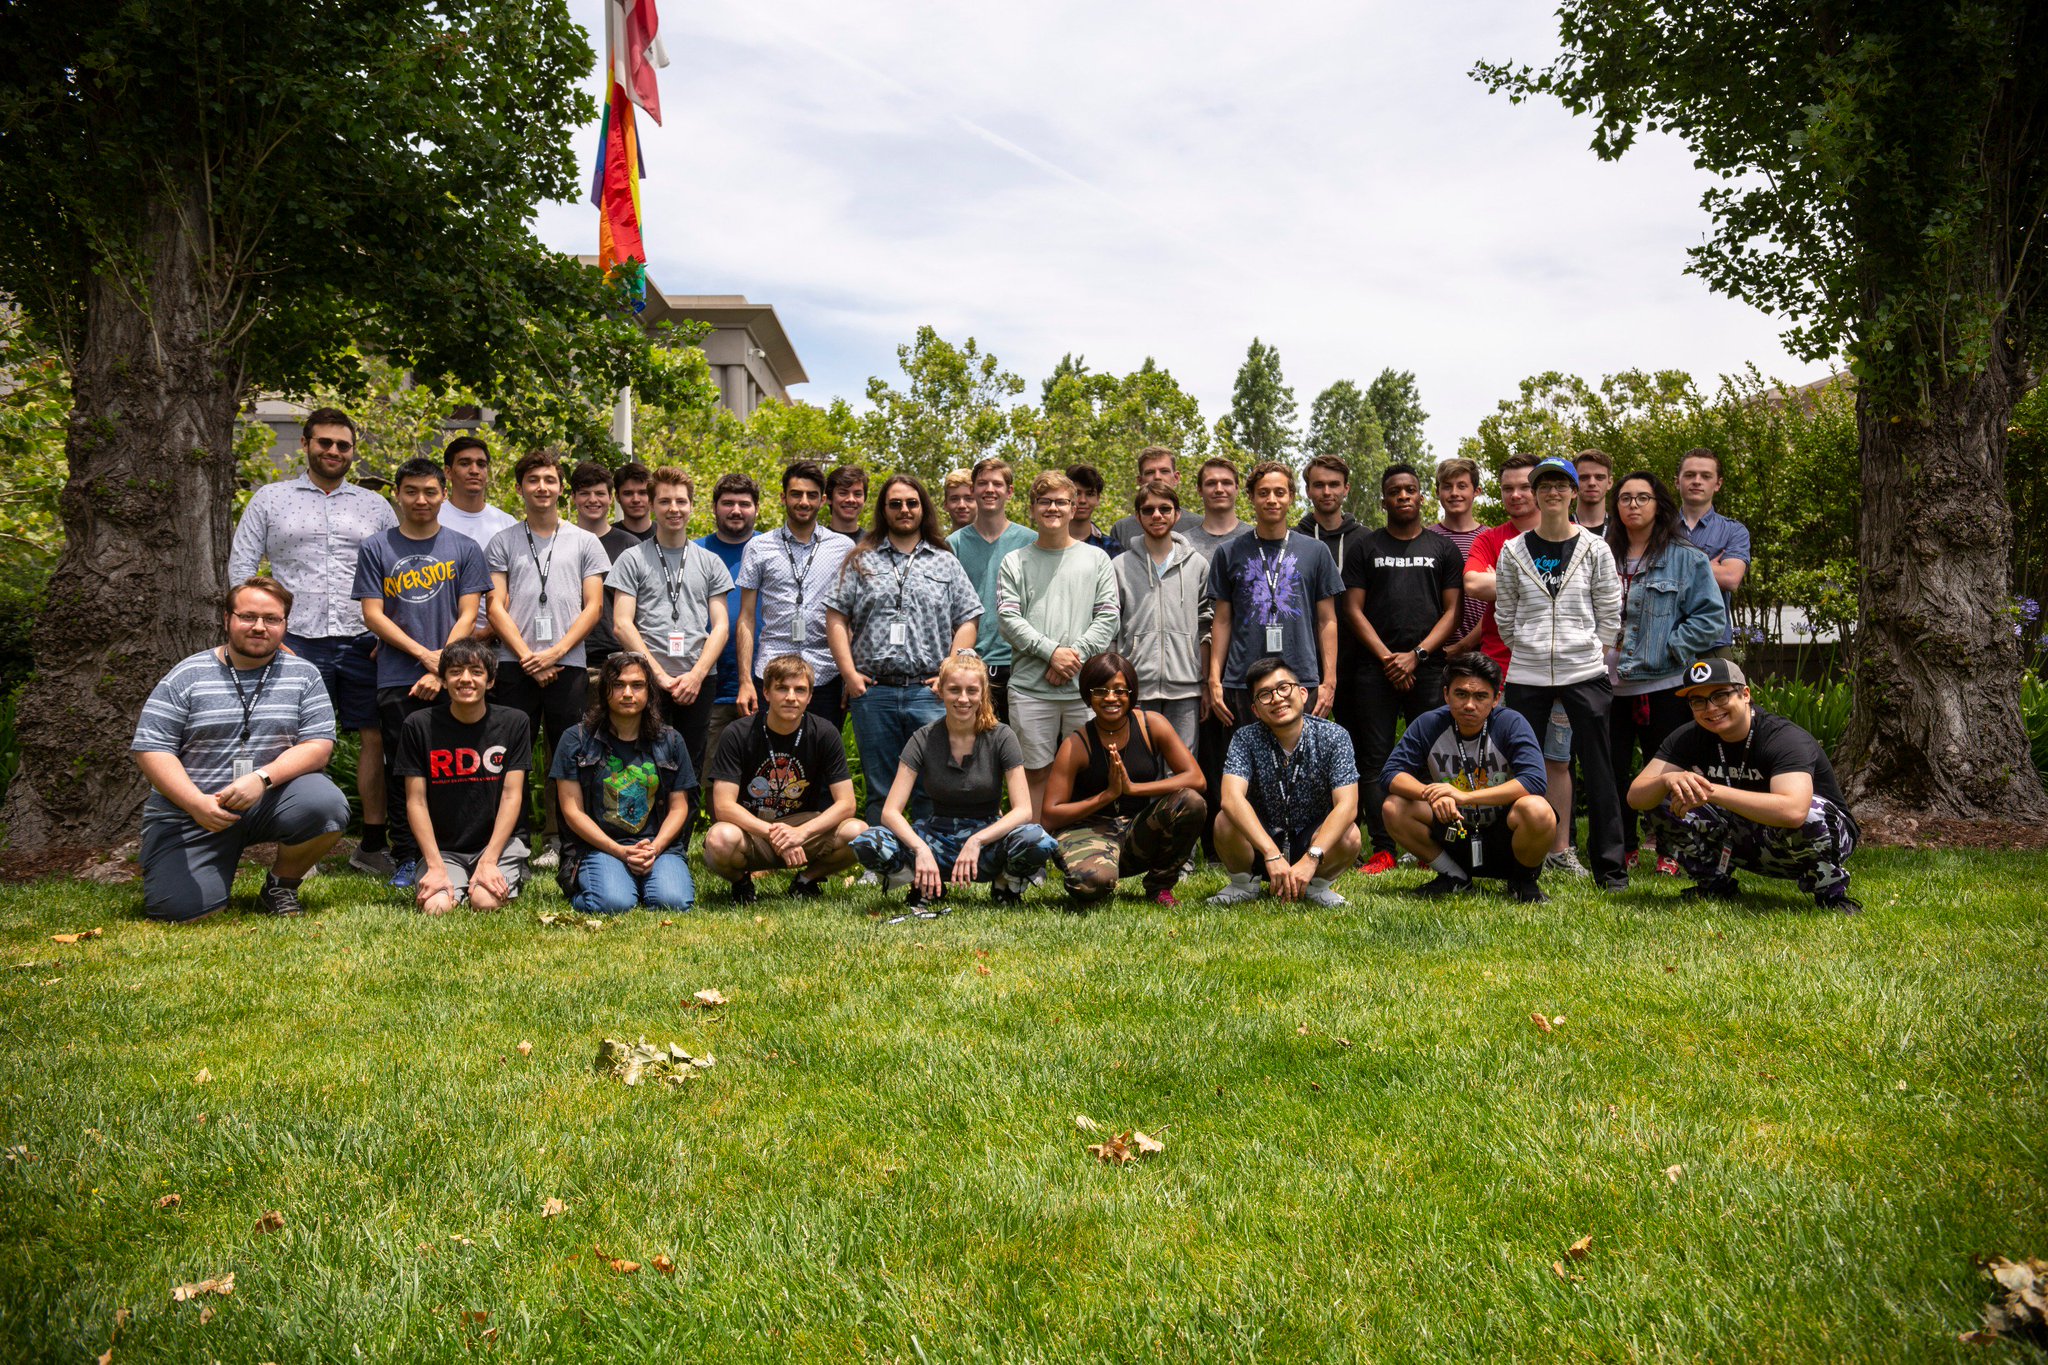 Roblox Developer Relations On Twitter Say Hello To Our Complete Class Of Summer 2019 Accelerators Can T Wait To See What Games This Talented Group Will Create Roblox Robloxdev Https T Co Iawimrjzd4 - roblox developers page 647